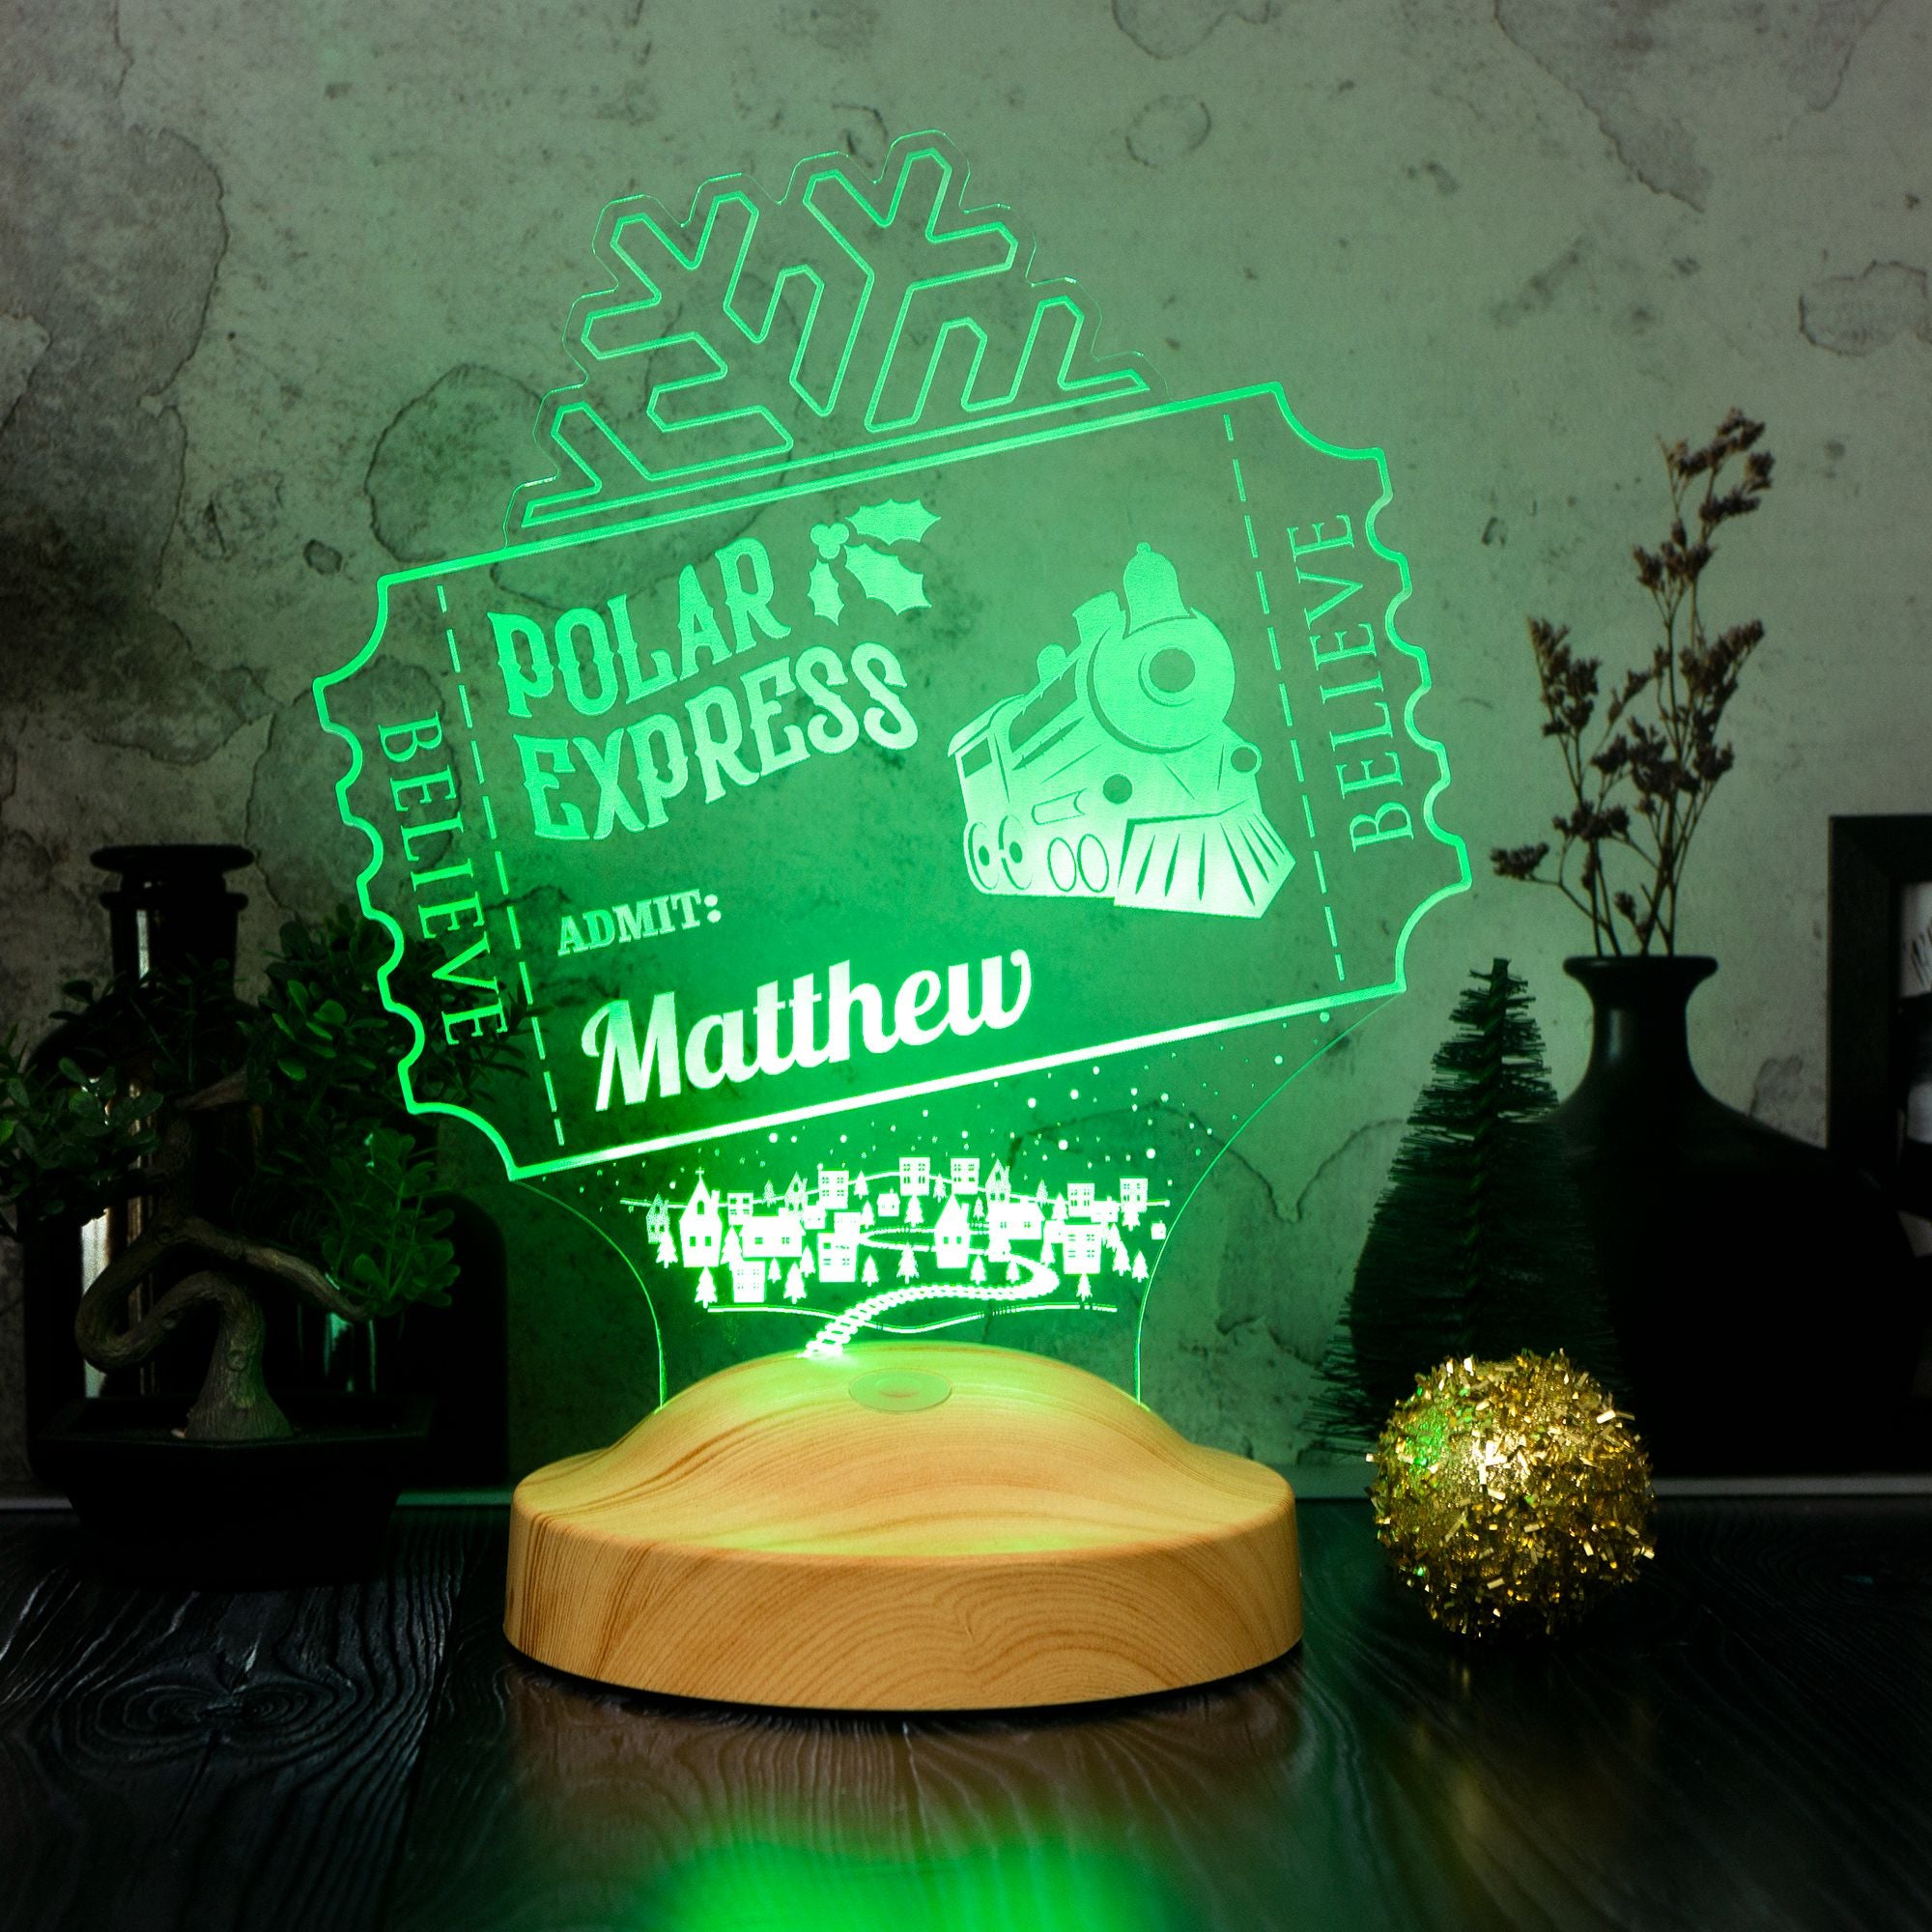 Polarexpress soft nacts gift personalized lamp with engraving